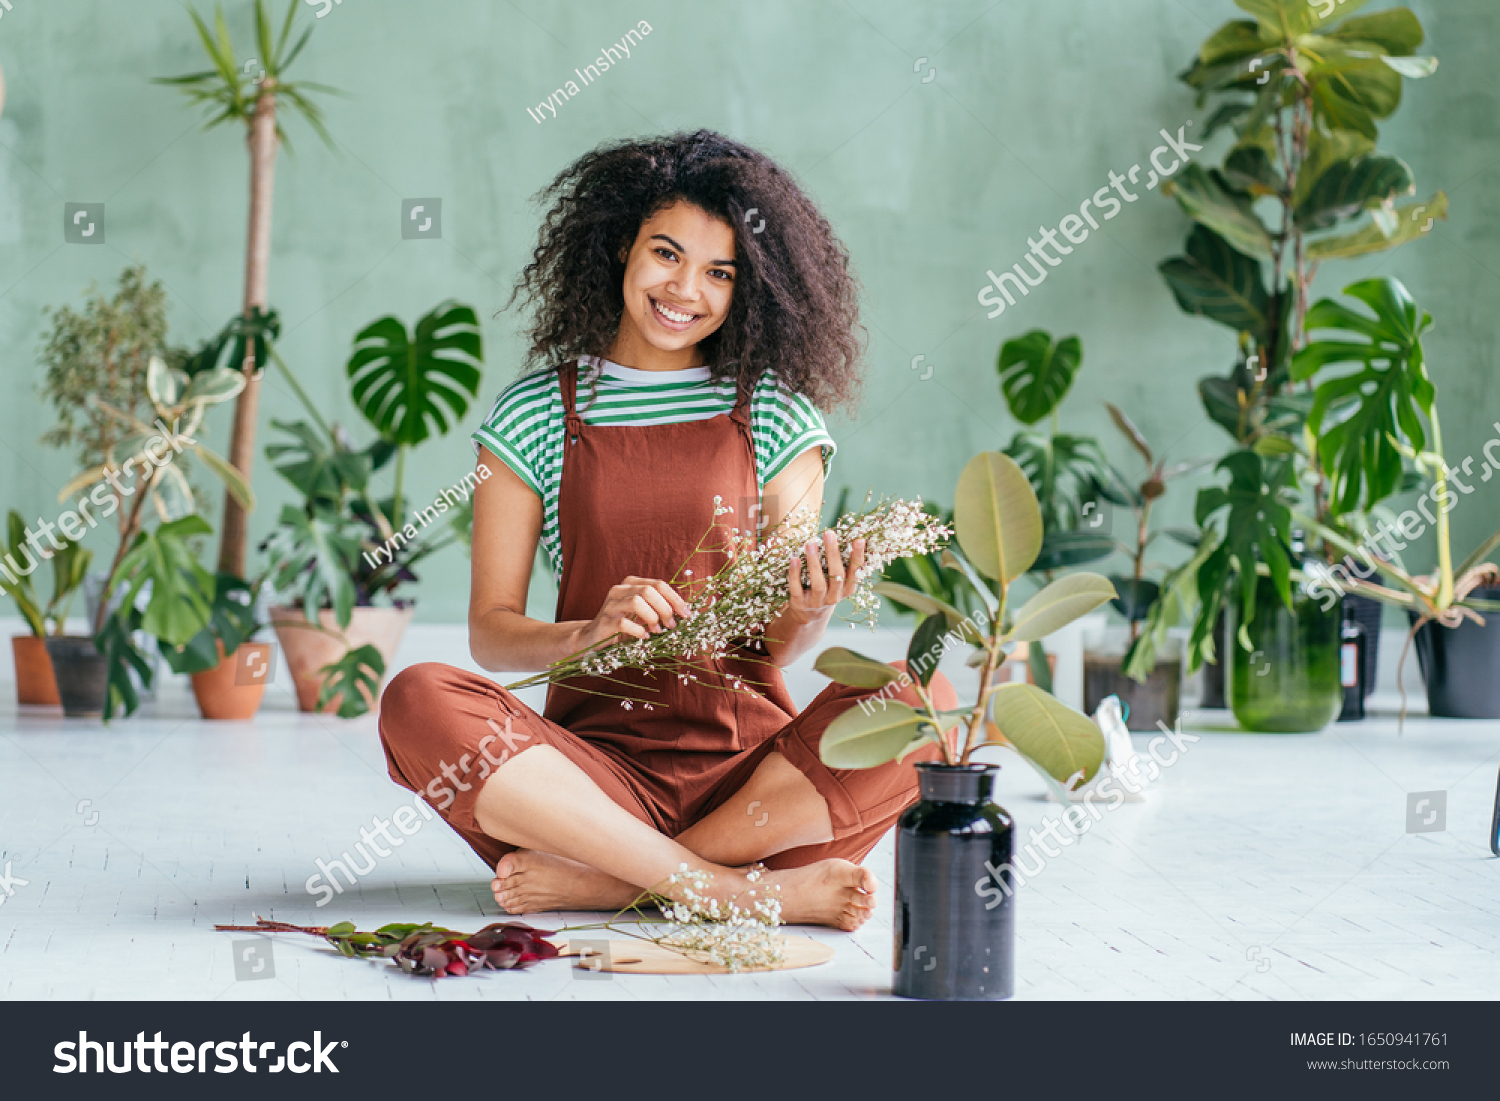 Young woman cultivating home plants.Small business.Sensual mixed race female florist with flowers in hands against background of indoor plants. Life lover, zero waste, inspiration, summer mood concept #1650941761